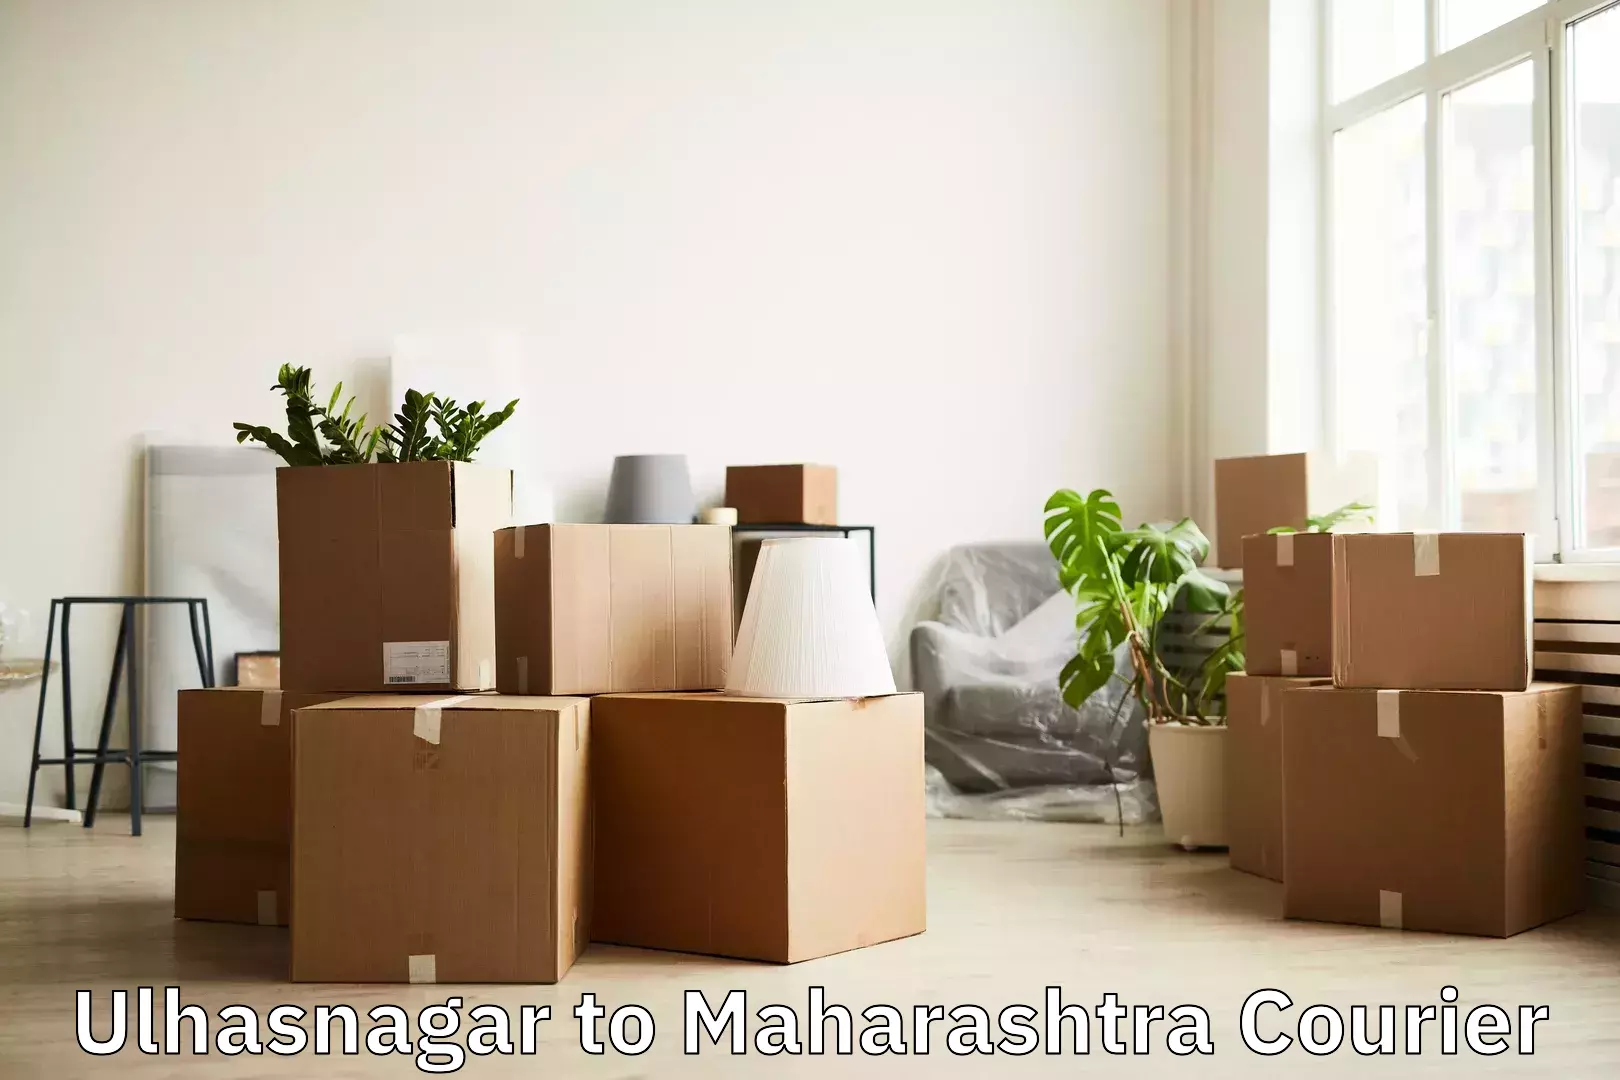 Instant baggage transport quote Ulhasnagar to Pen Raigad